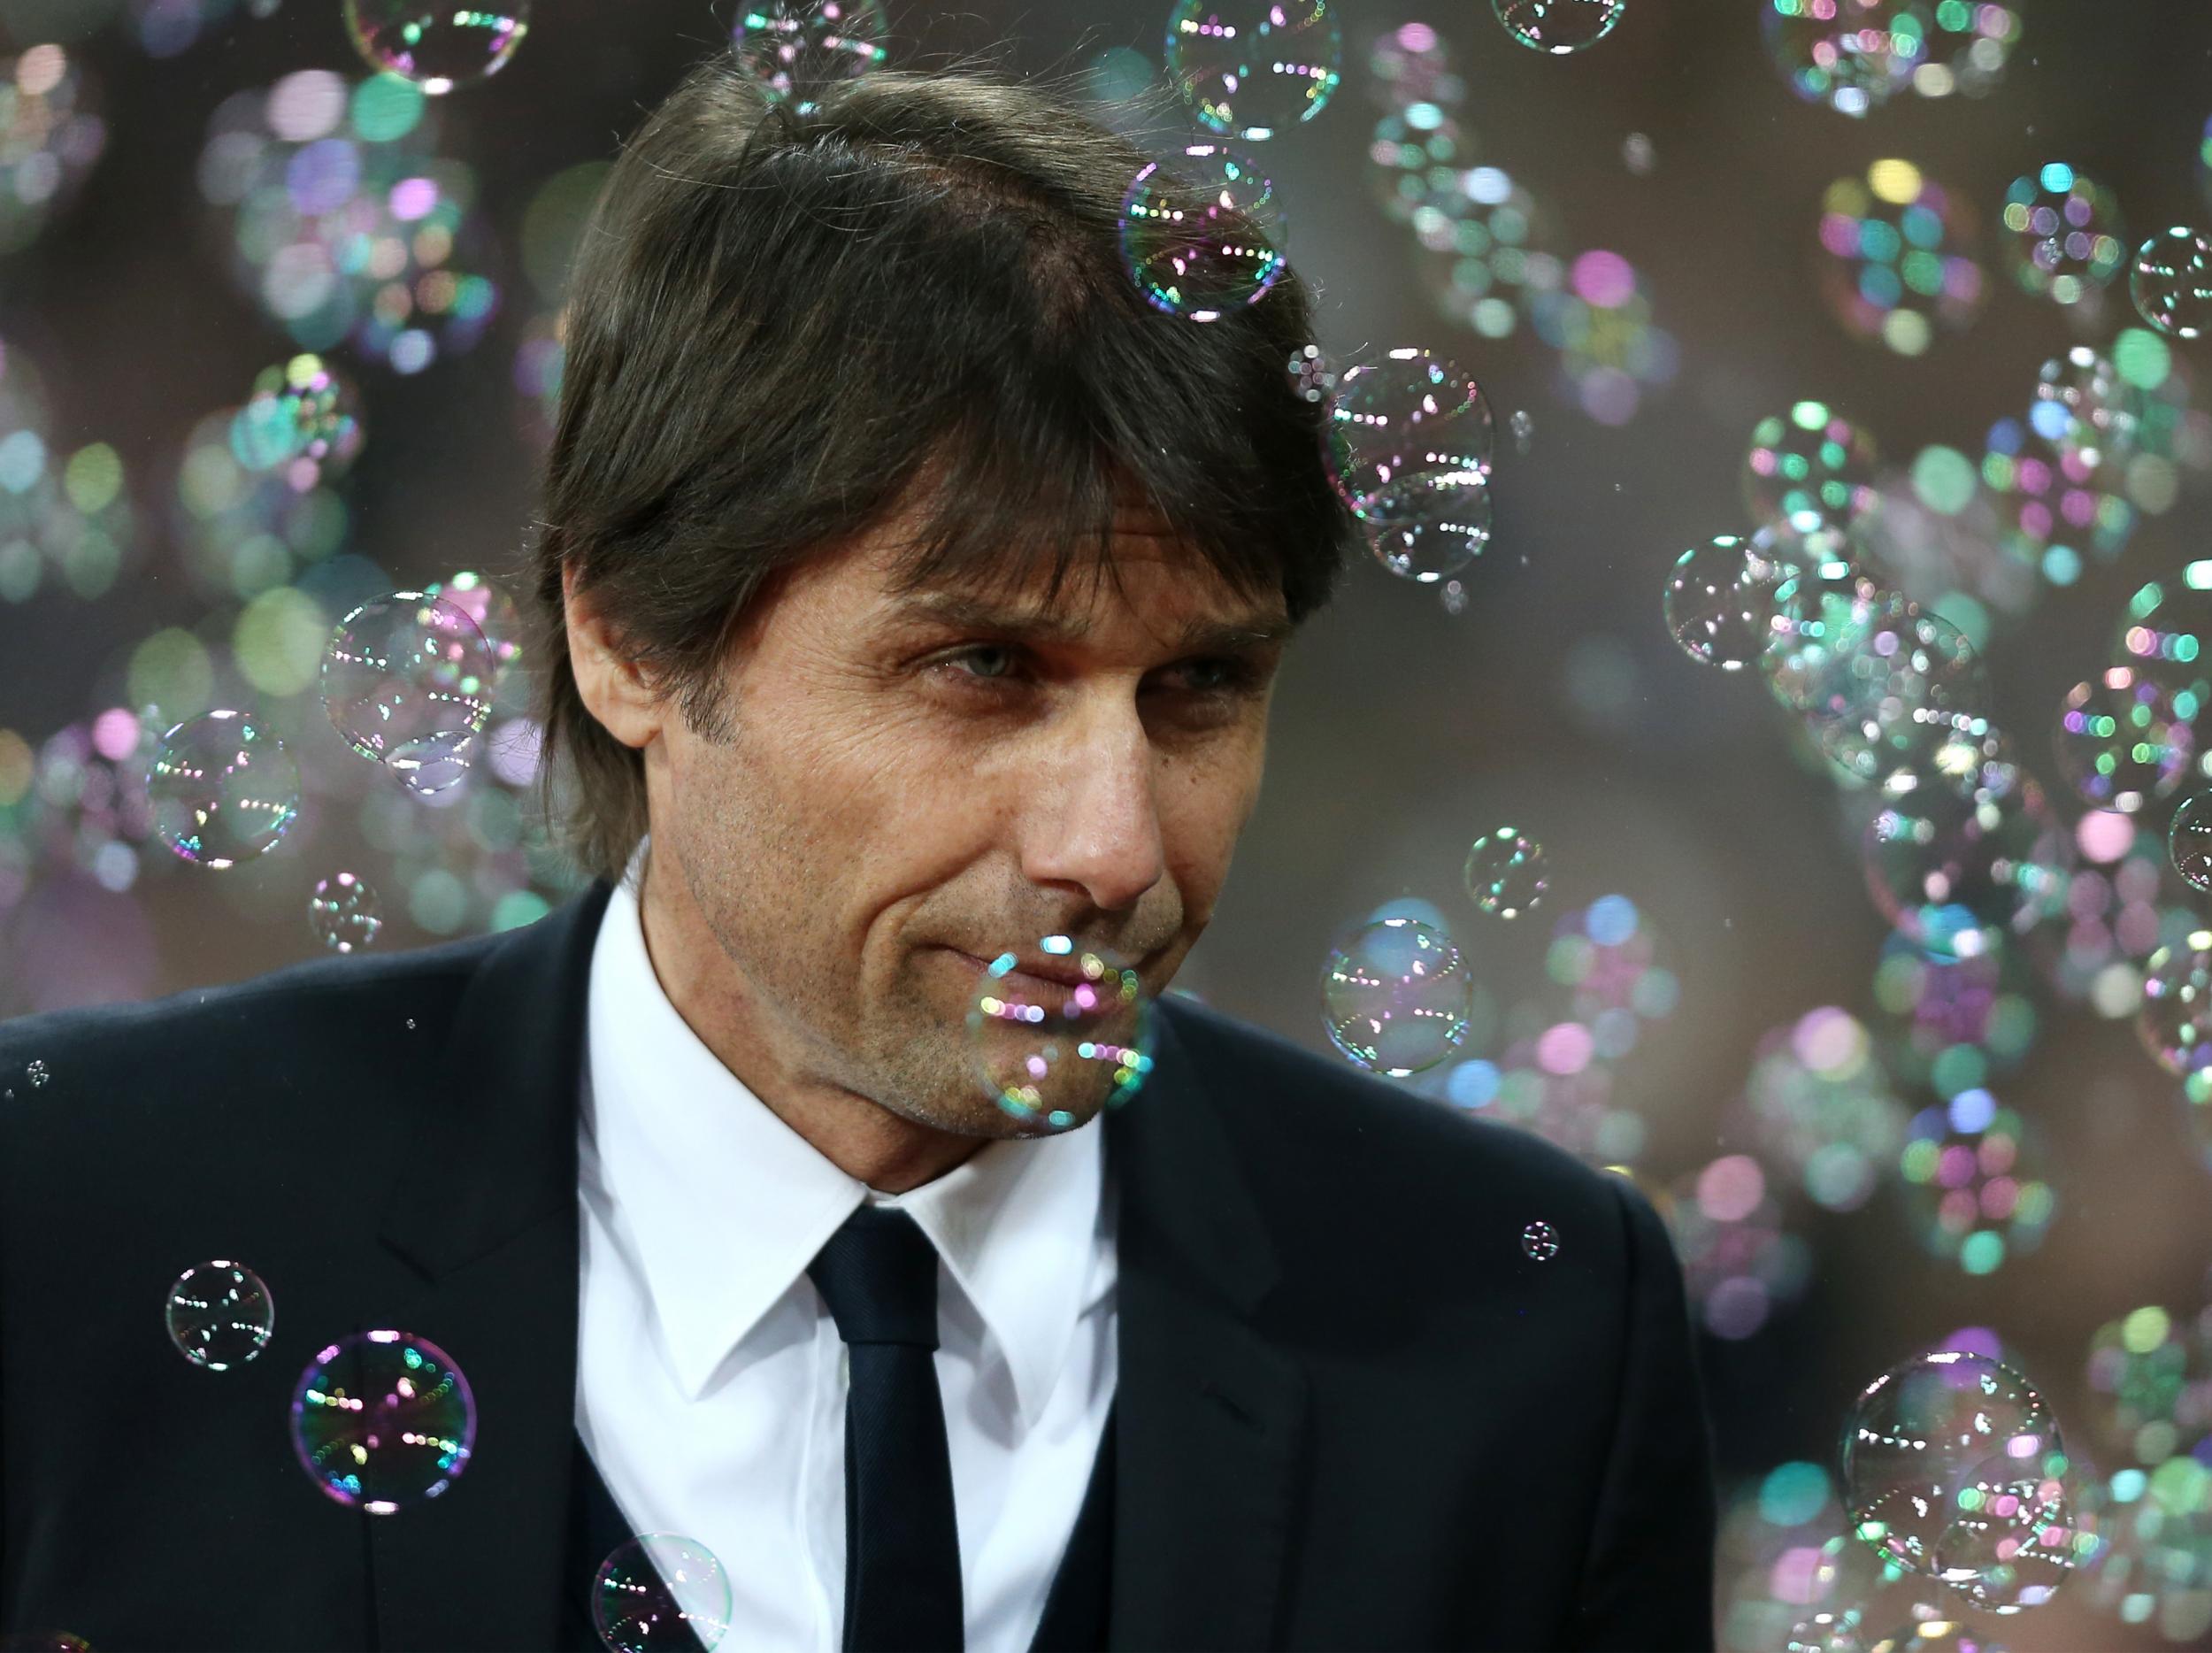 The finish line is in sight for Conte